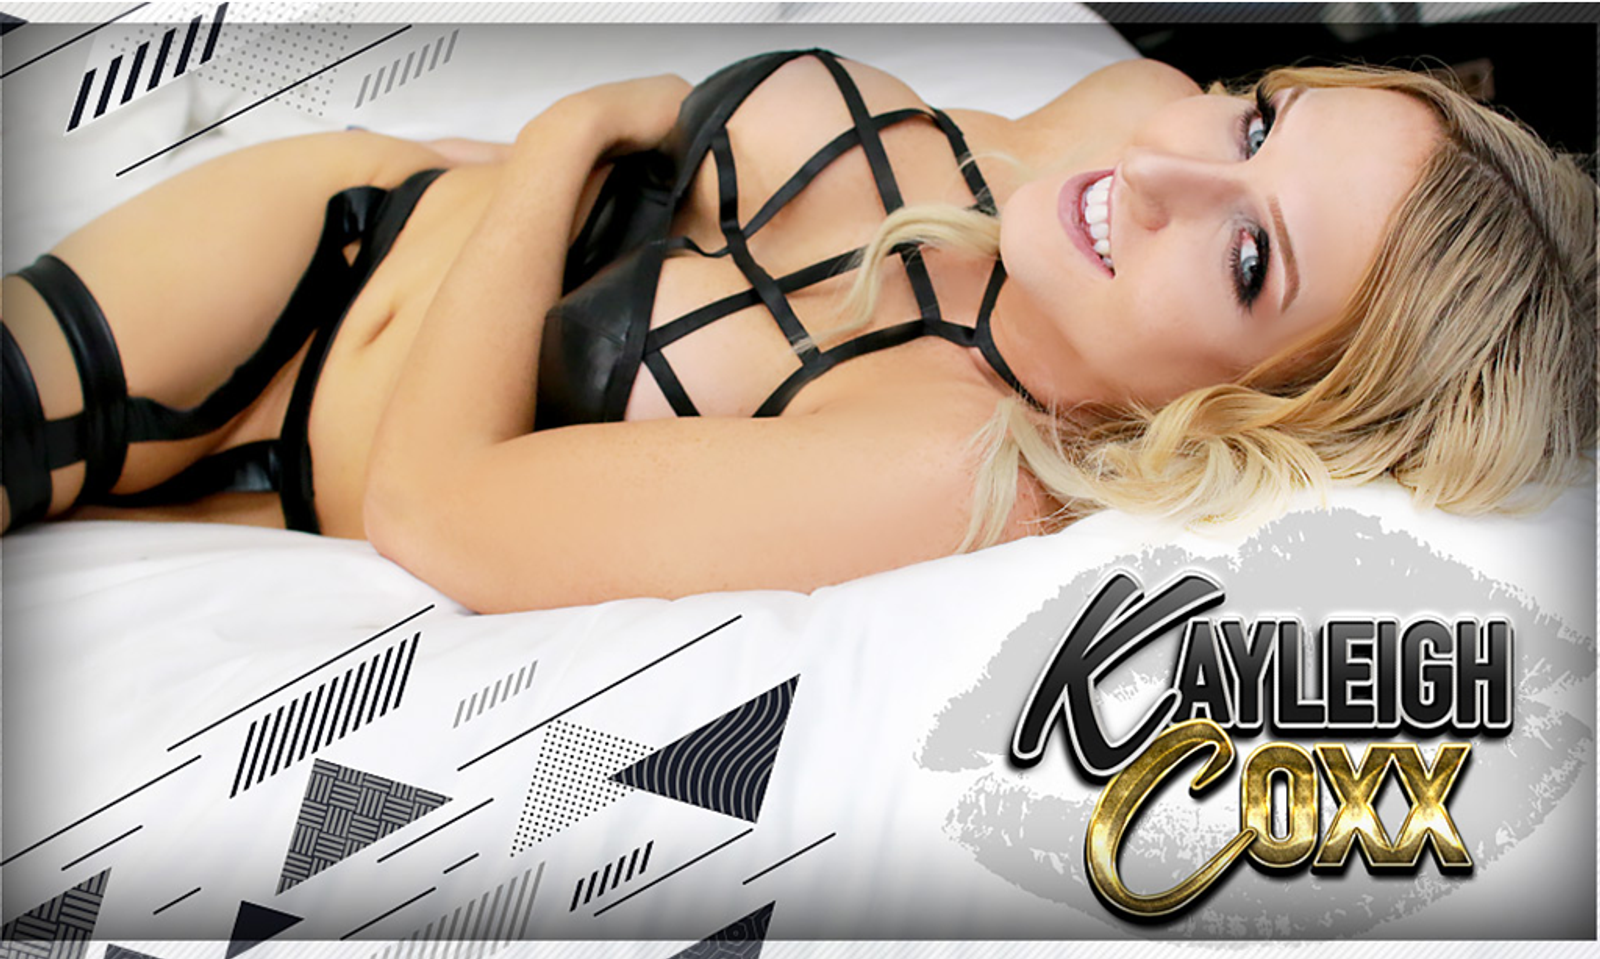 Kayleigh Coxx Chooses TransErotica for Official Site